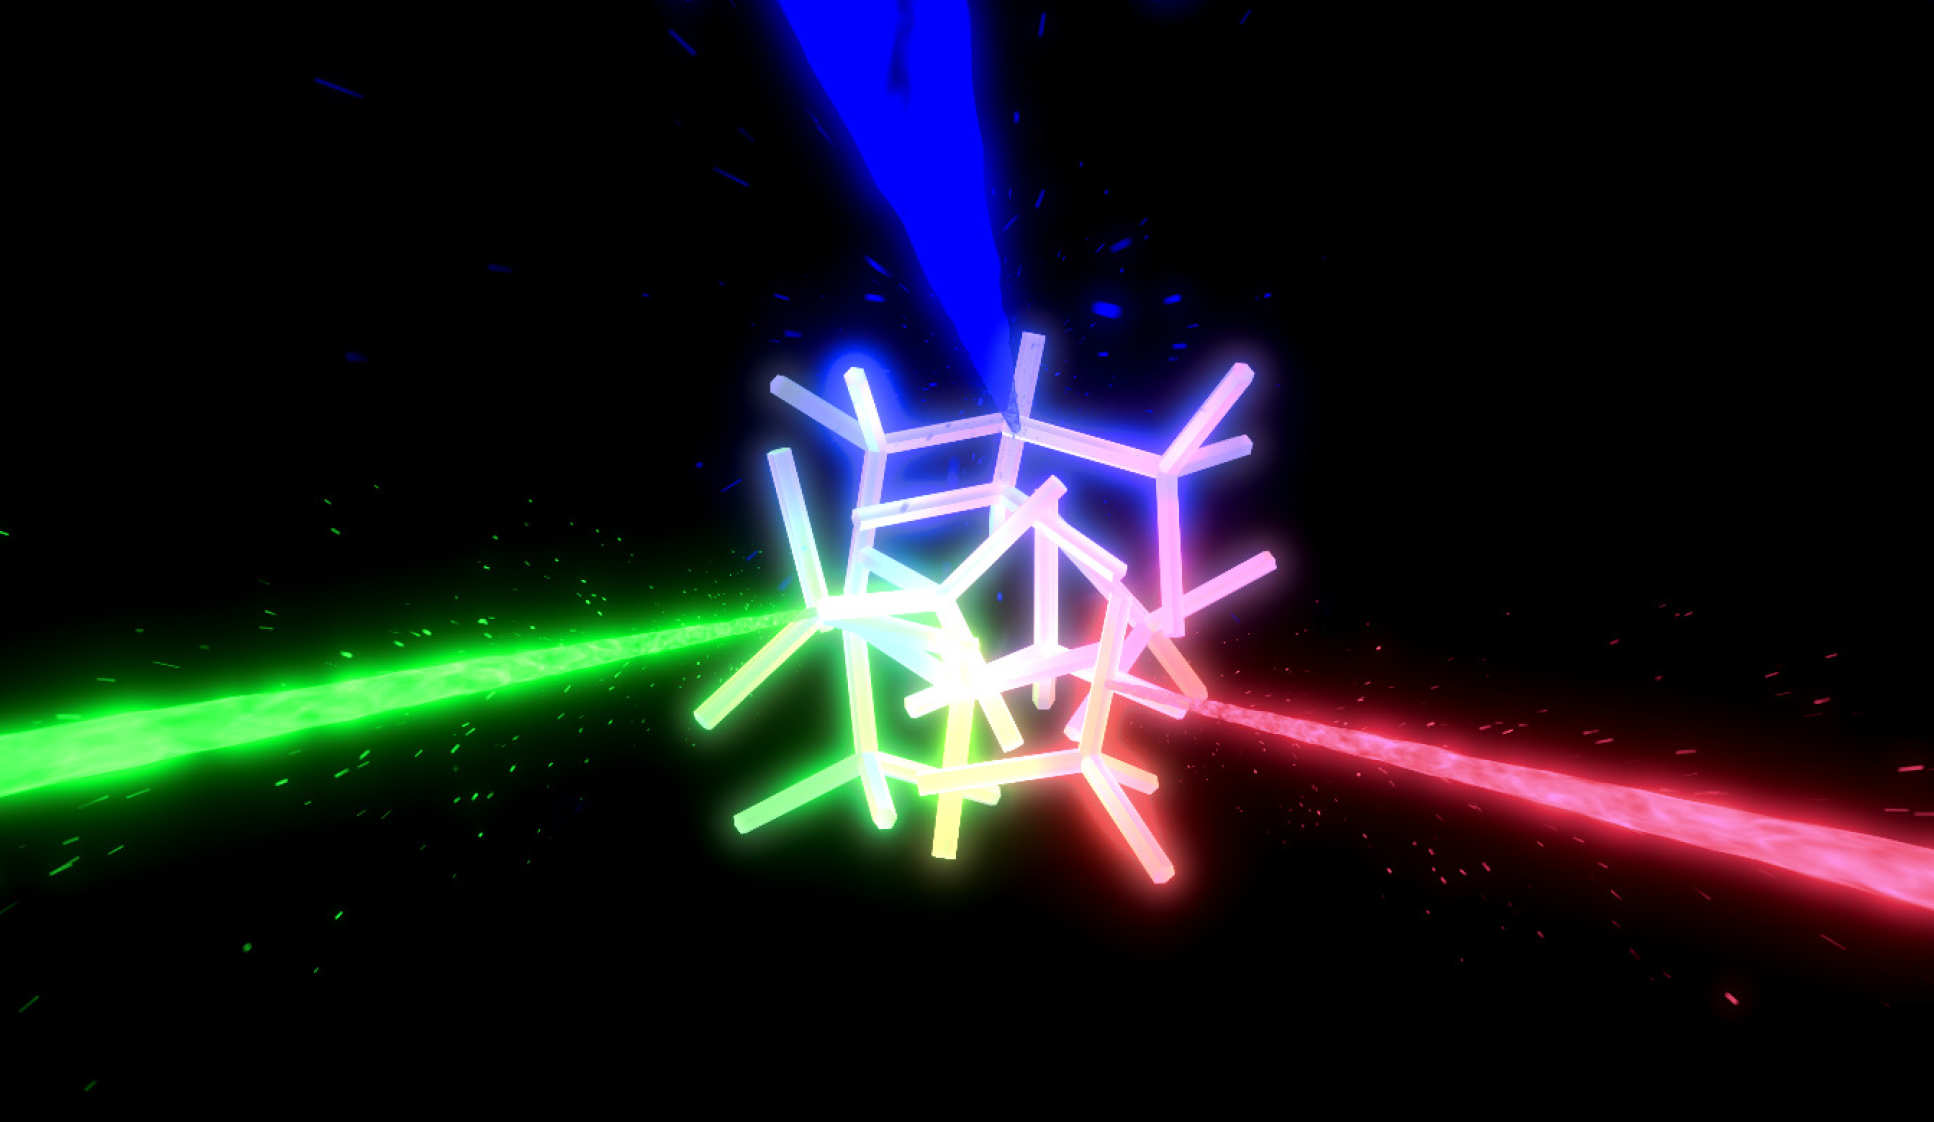 Illustration of red, green and blue lights entering a complex web